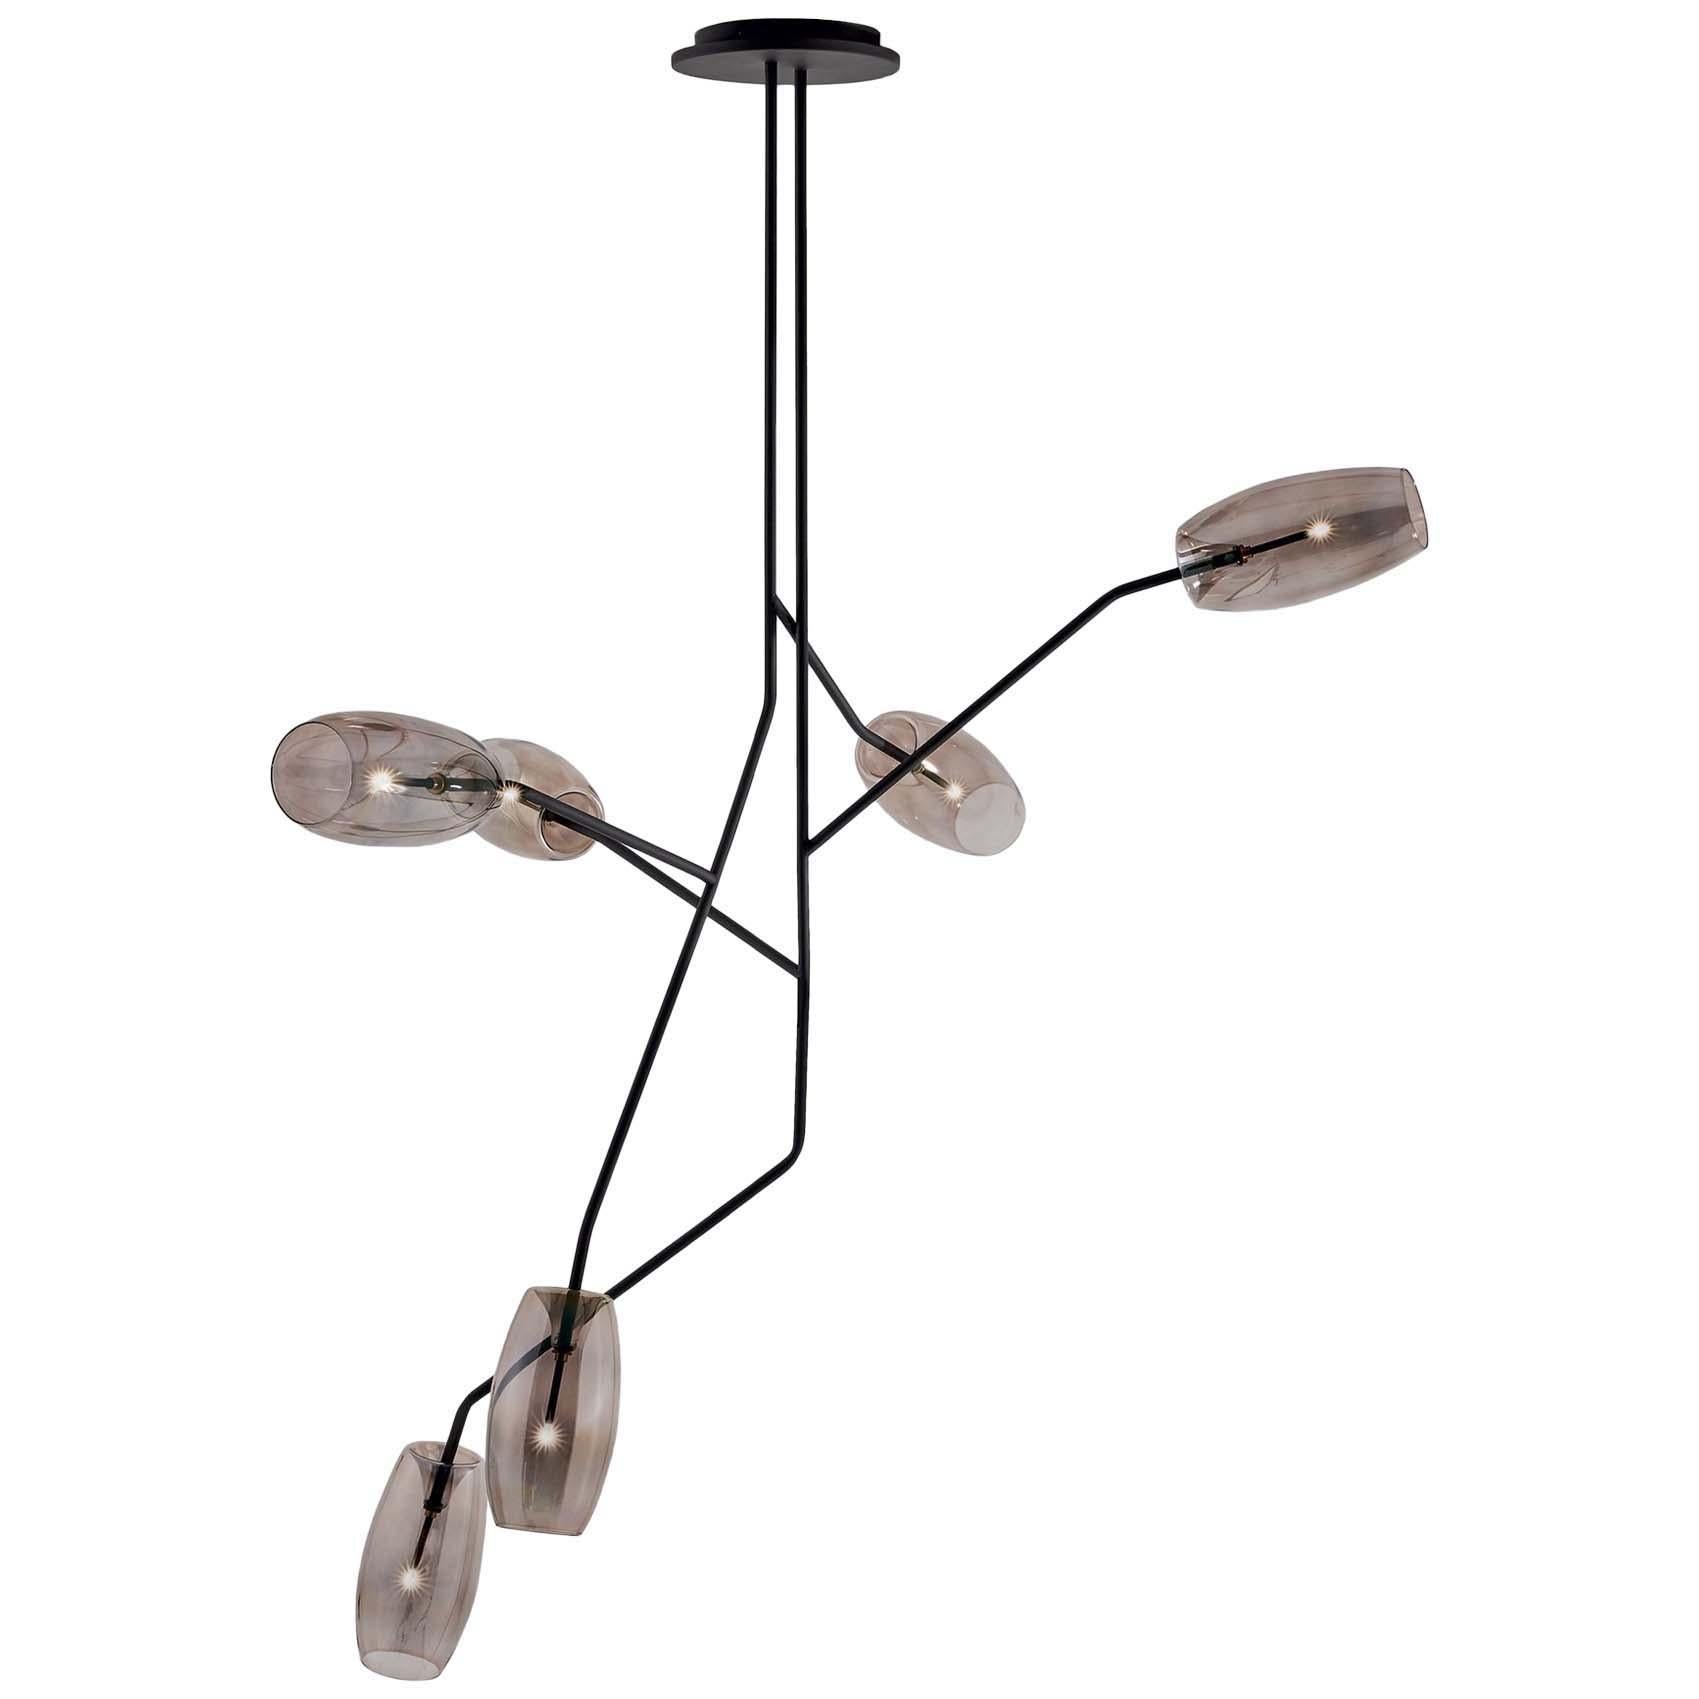 Diantha Chandelier DH, Gallotti & Radice with Mouth Blown Glass & Bronzed Metal For Sale